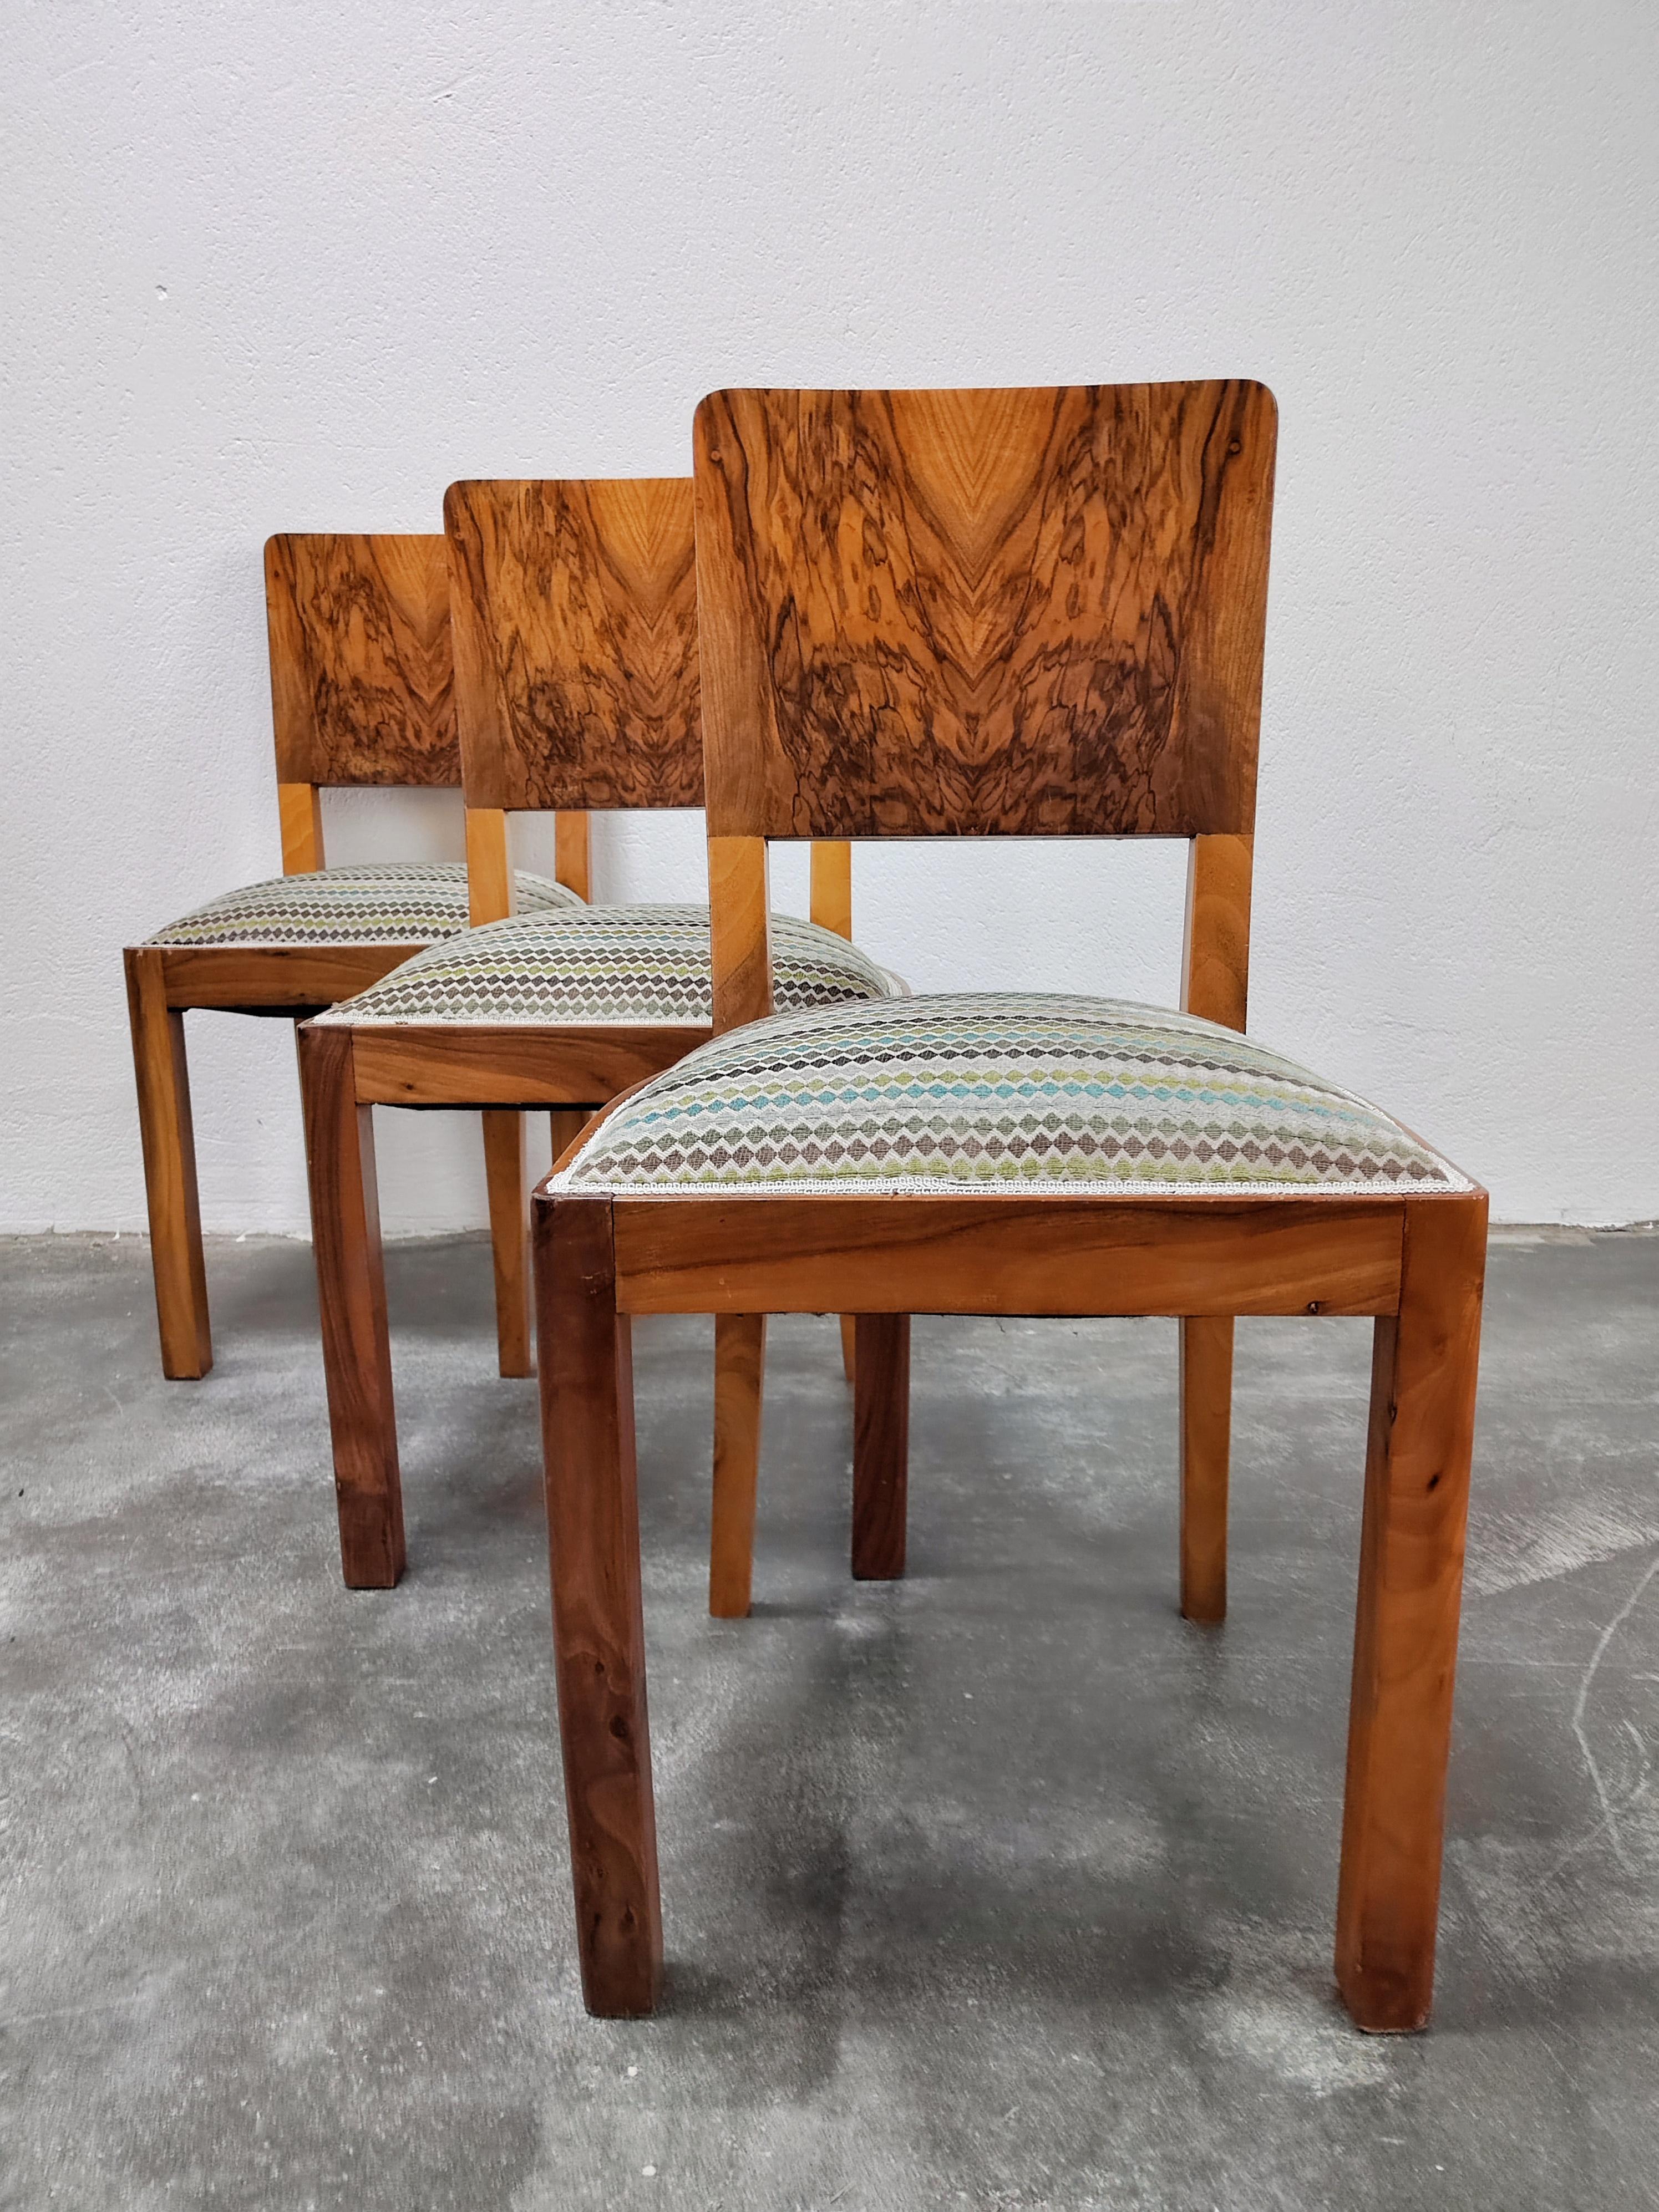 Mid-20th Century Set of Six Art Deco Dining Chairs in Walnut Roots Veneer, Austria 1940s For Sale